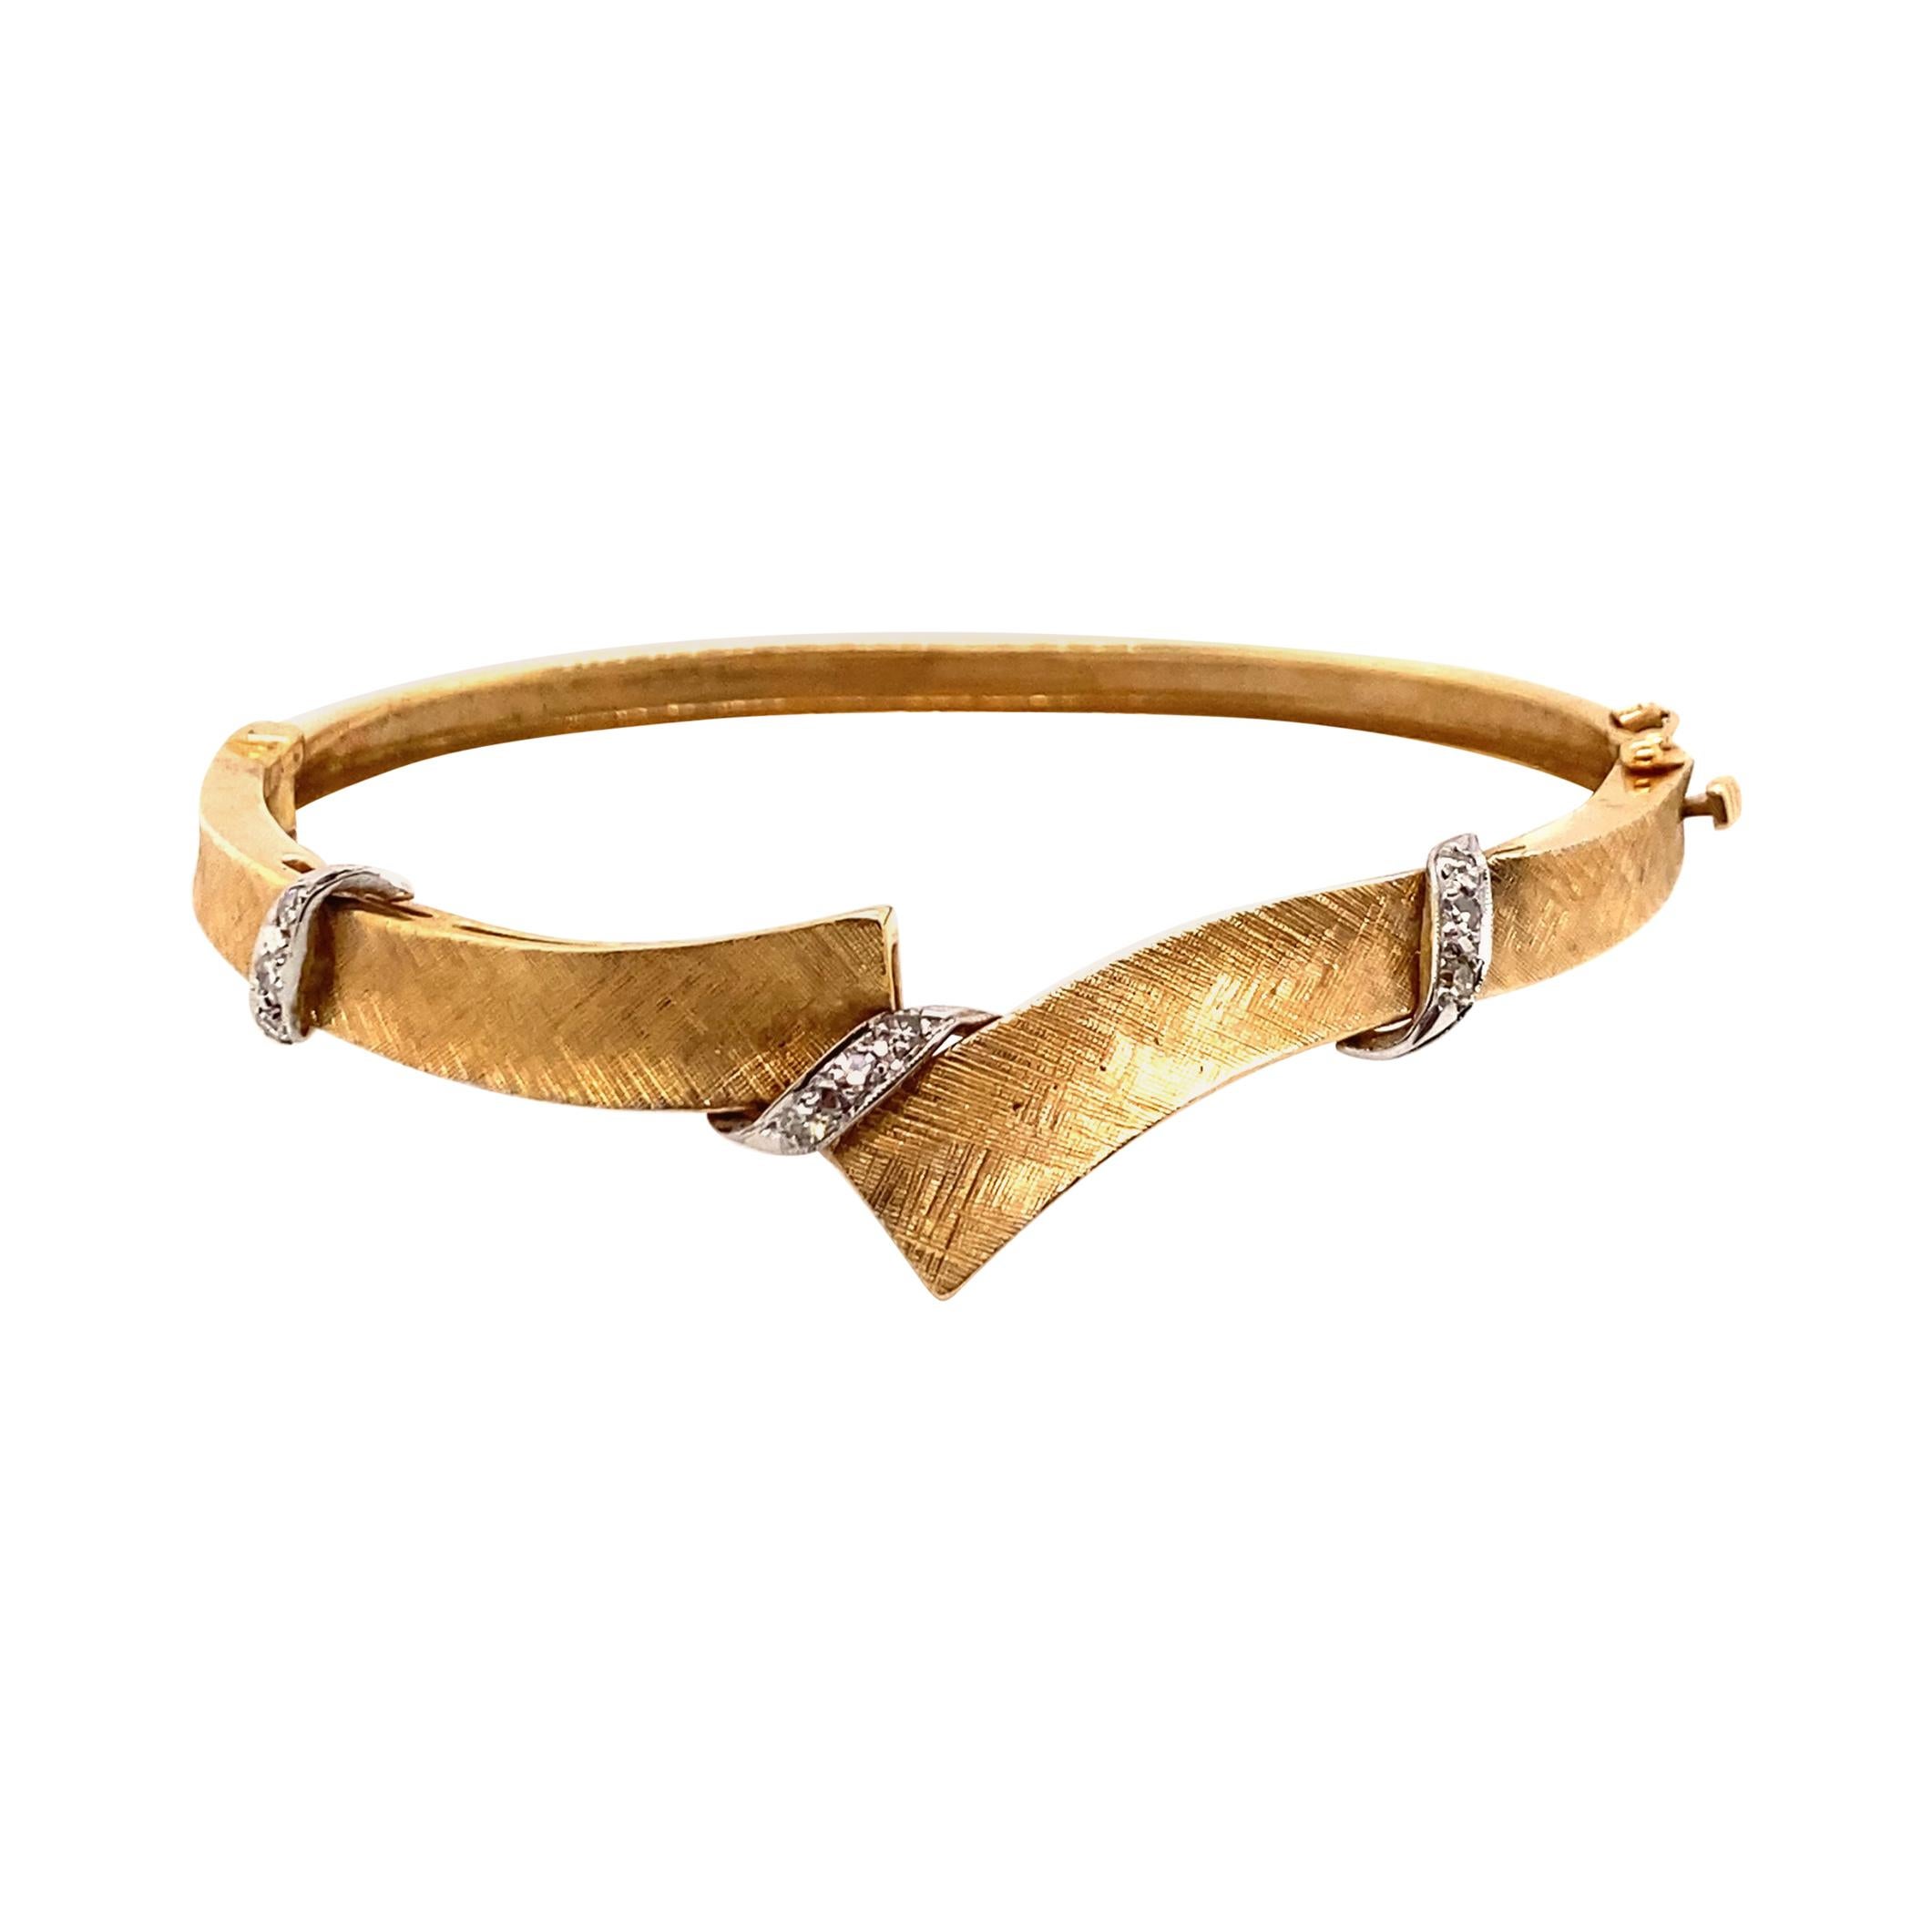 Vintage 1950's 14K Yellow Gold Bangle Bracelet with Diamond Accents For Sale